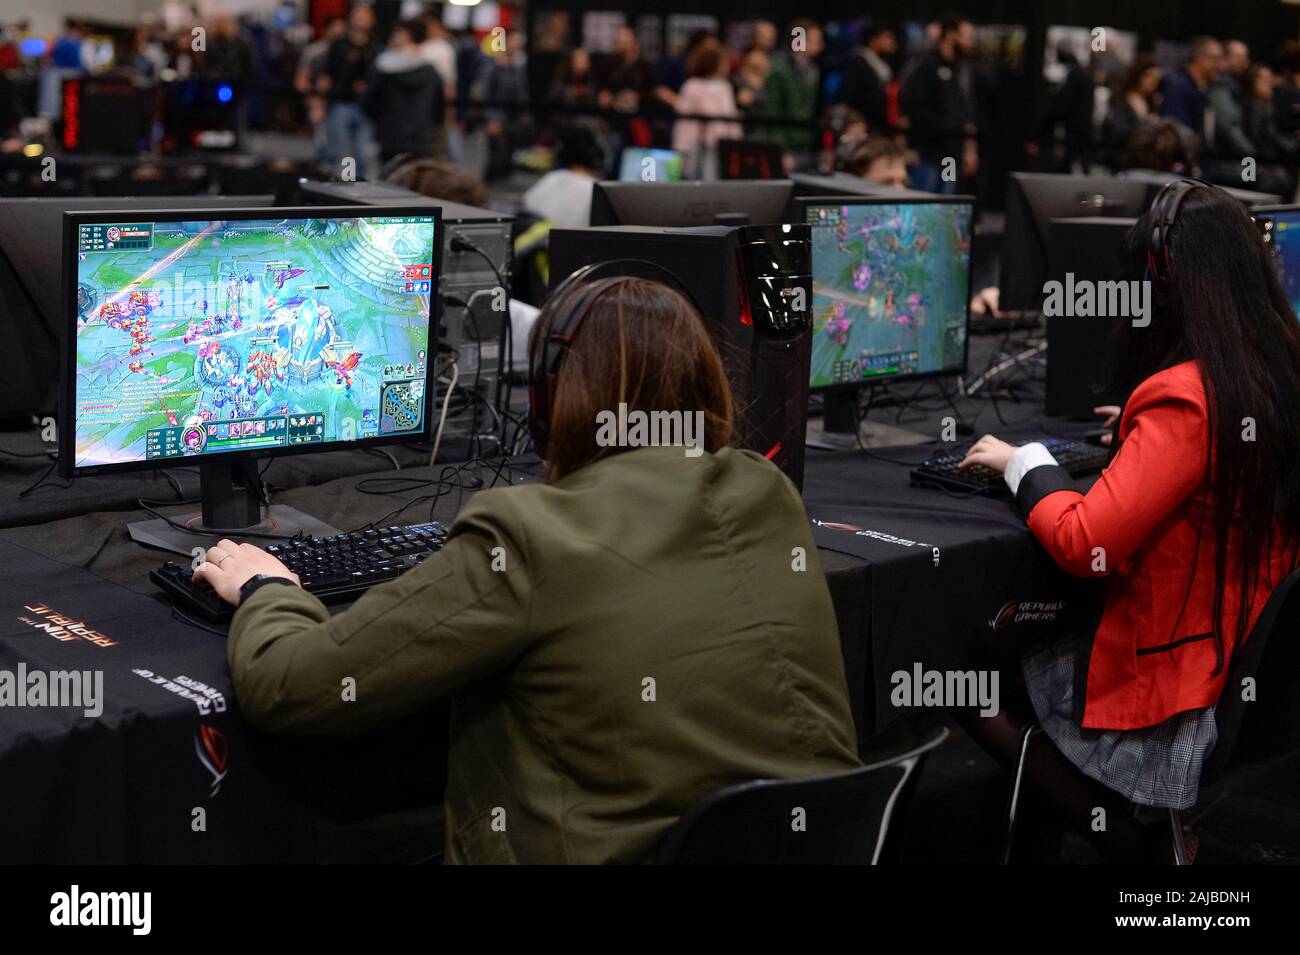 Turin, Italy - 15 April, 2018: People play 'League of Legends' video game during the 'Torino Comics' fair. Credit: Nicolò Campo/Alamy Live News Stock Photo